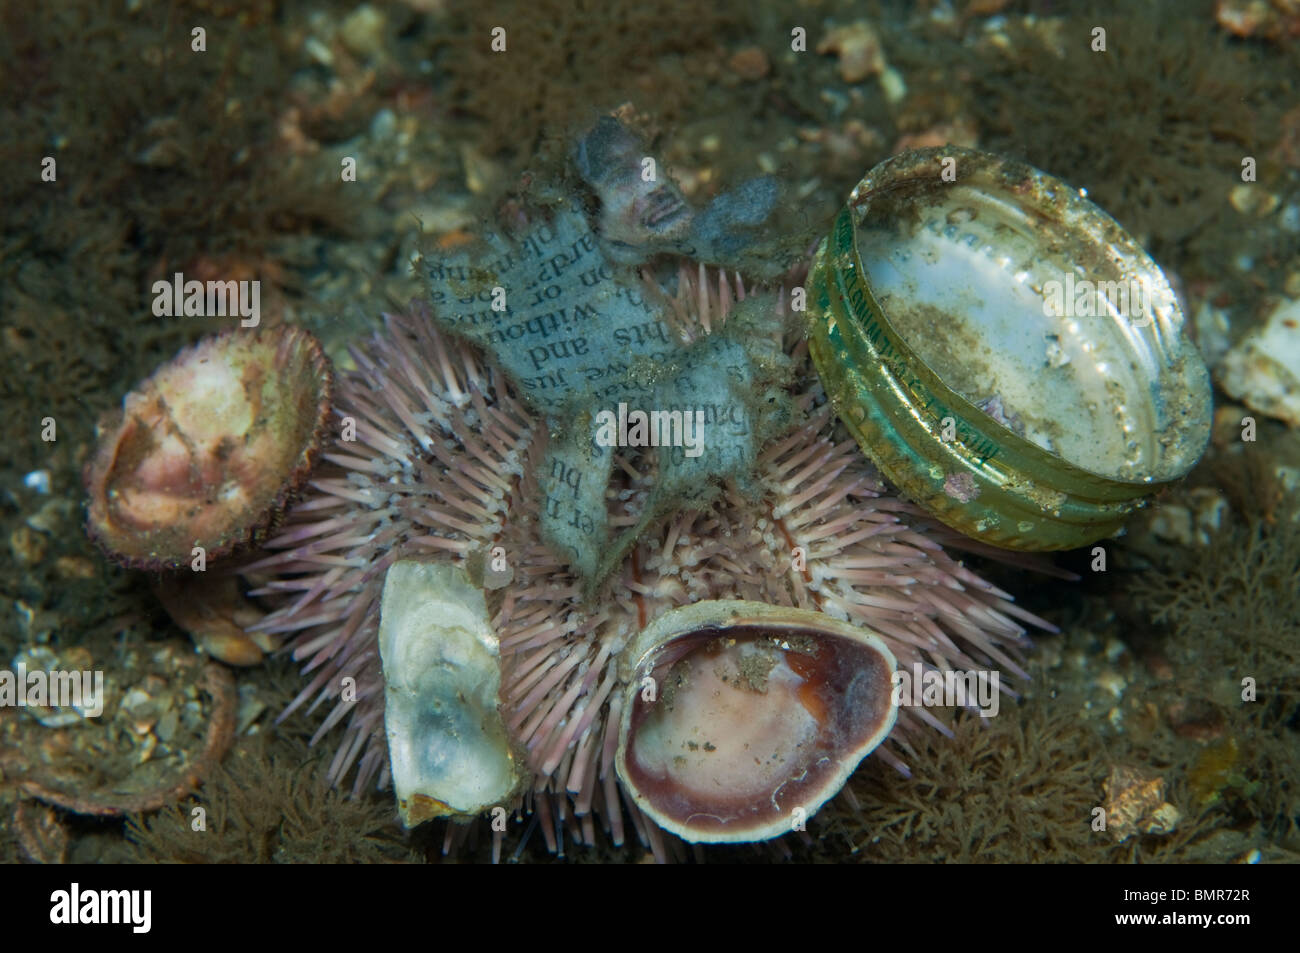 Sea Urchin (Lytechinus variegatus) with shells, beer bottle cap and newspaper attached to it. Stock Photo